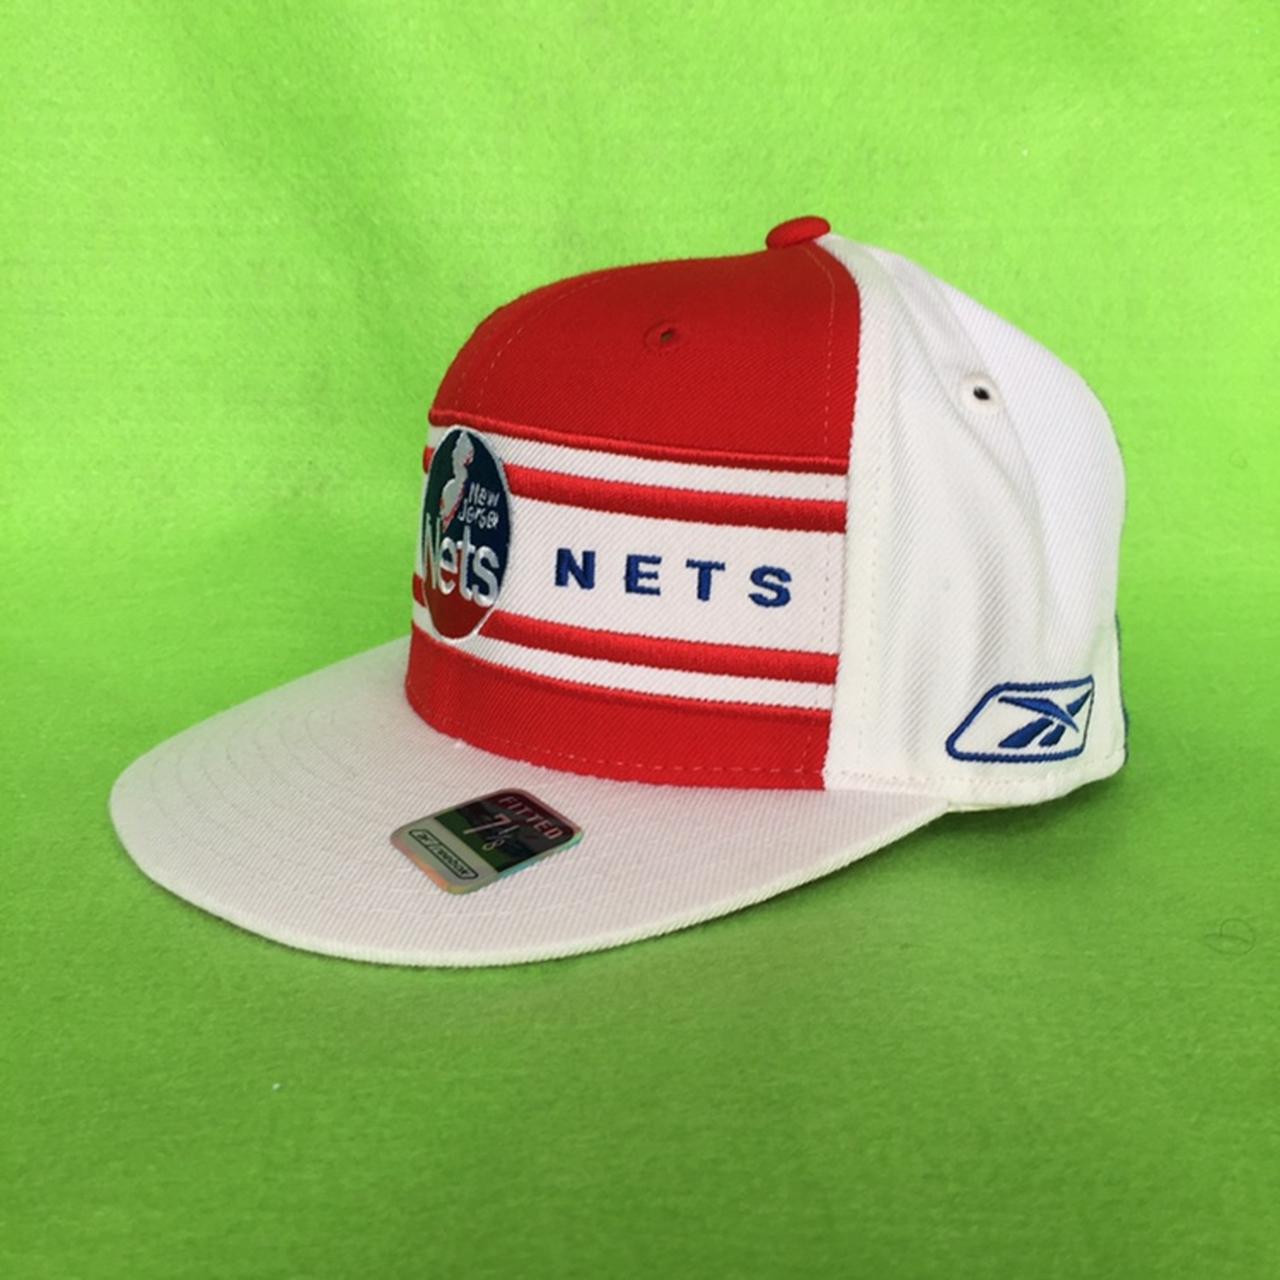 VINTAGE NEW JERSEY NETS 7 1/4 RED WHITE BLUE FITTED 100% WOOL